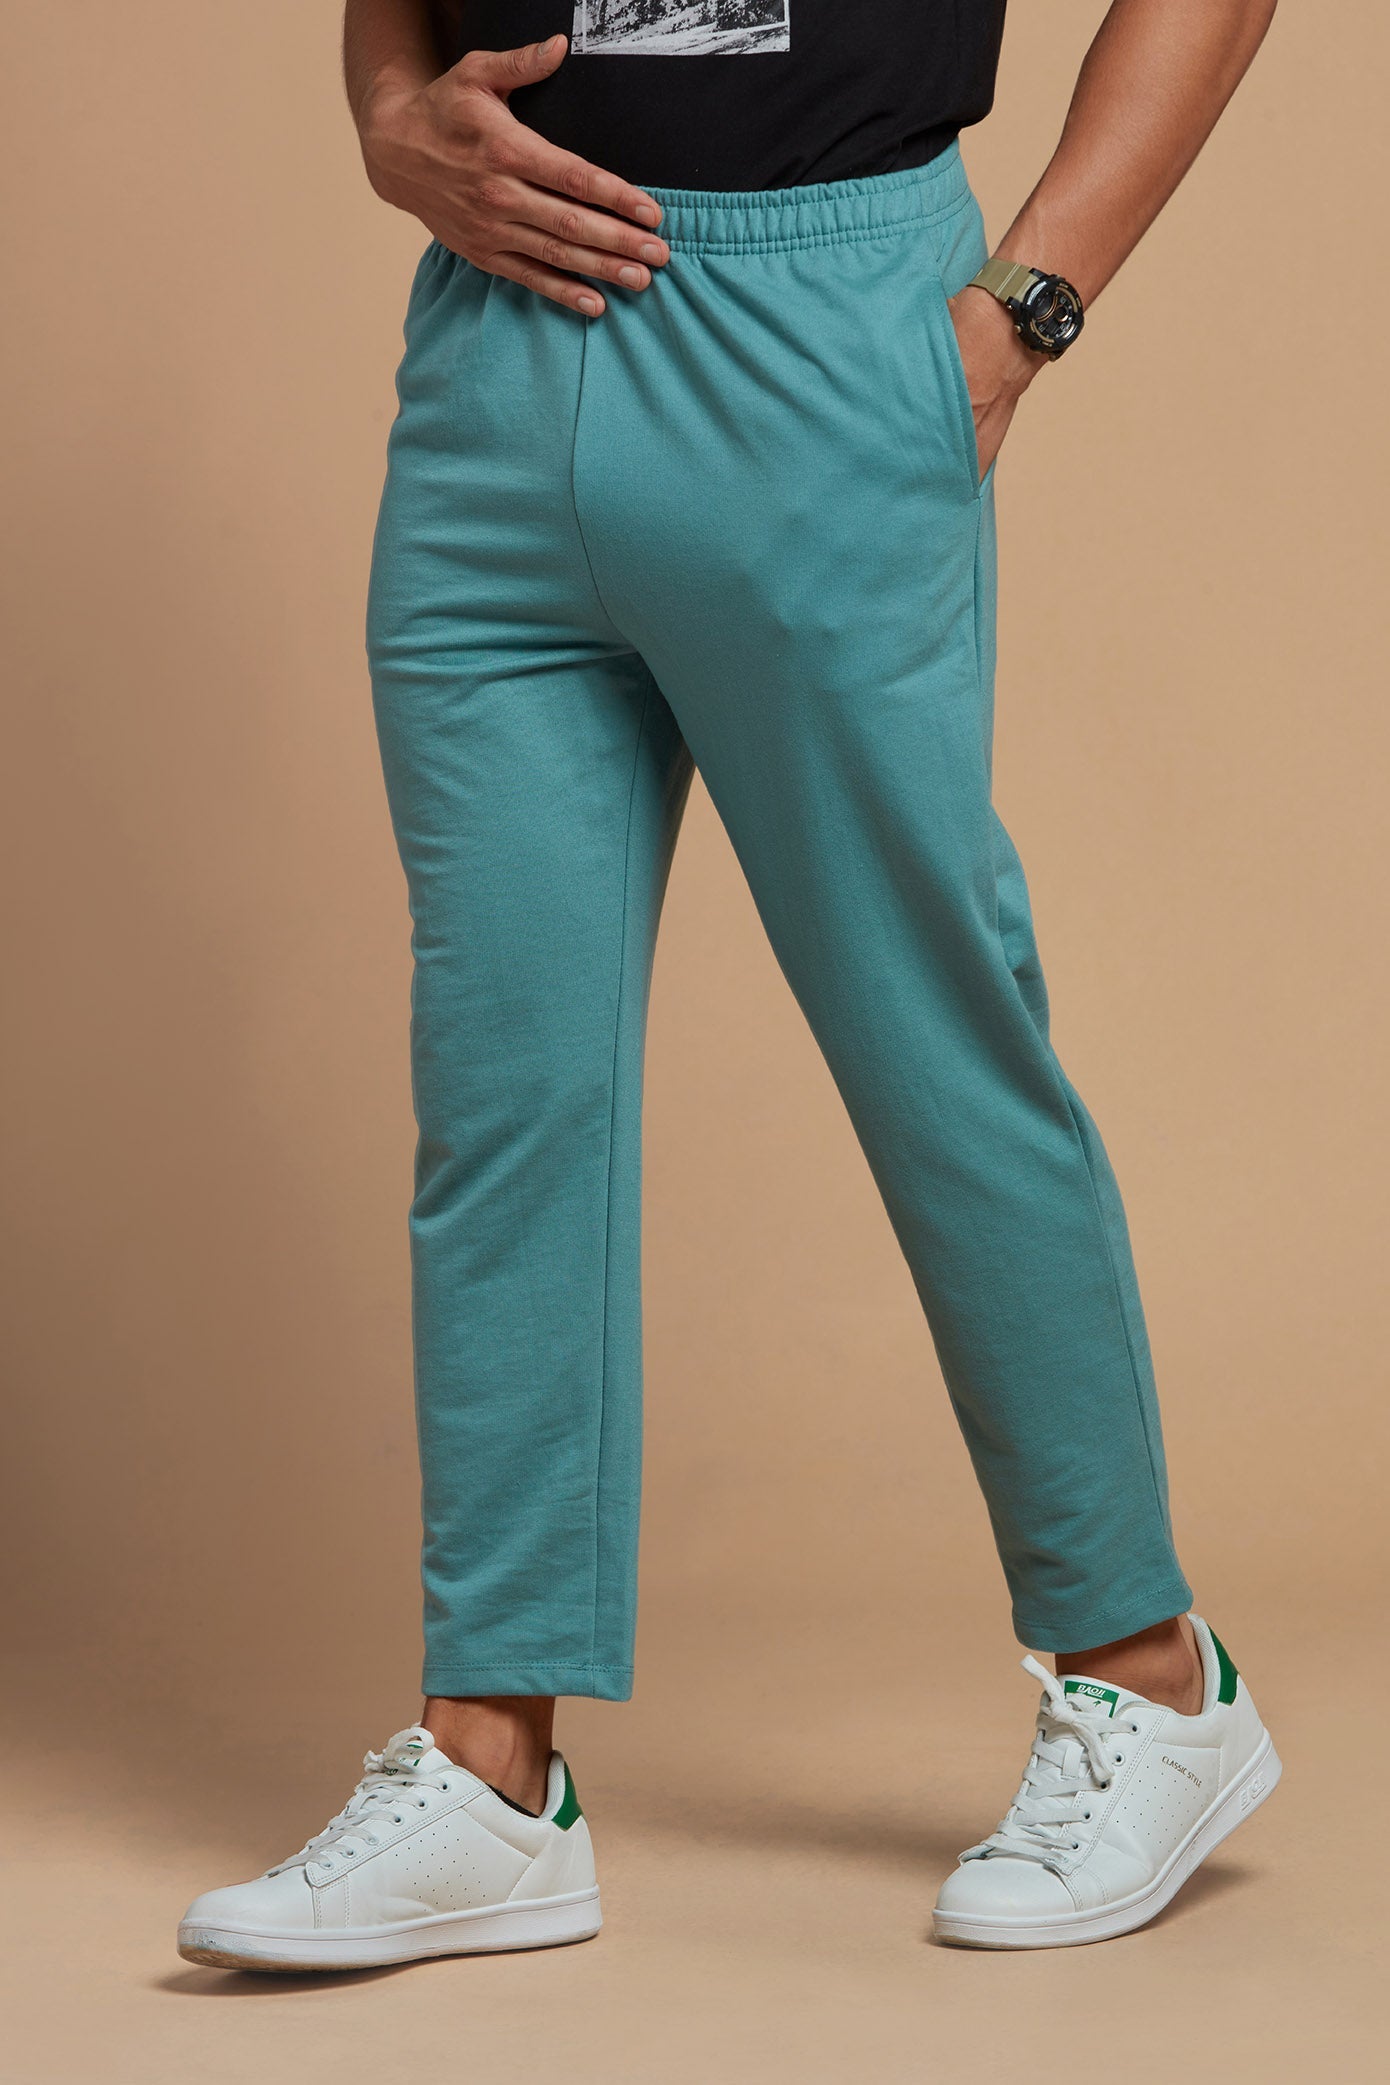 Joggers Track Pants - Buy Joggers Track Pants for Men, Women and Kids